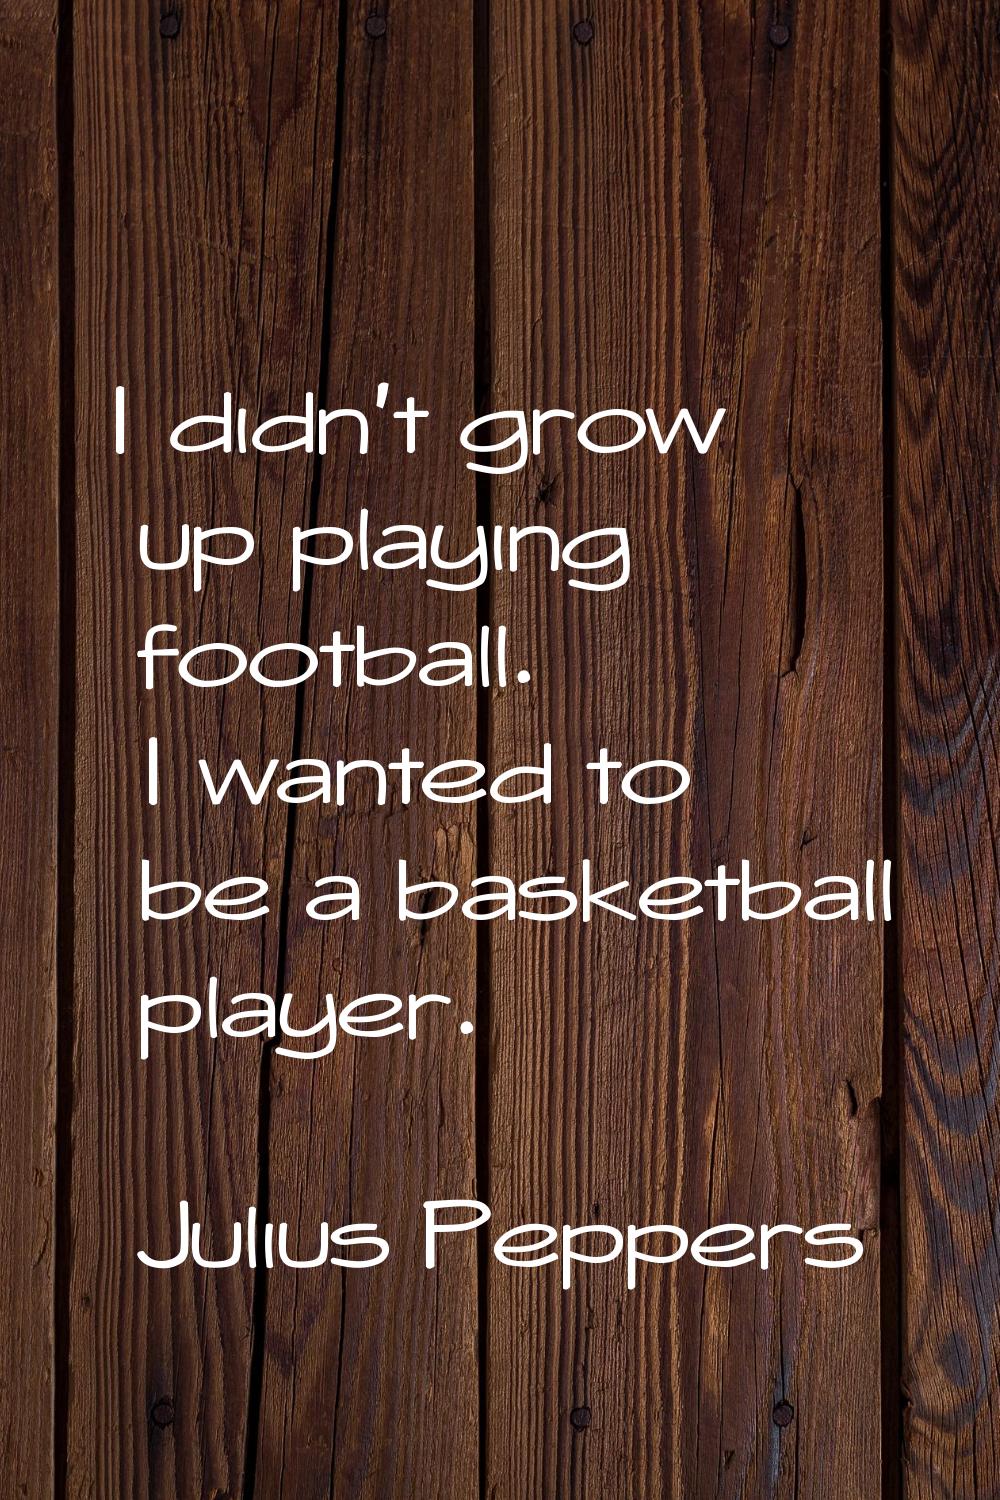 I didn't grow up playing football. I wanted to be a basketball player.